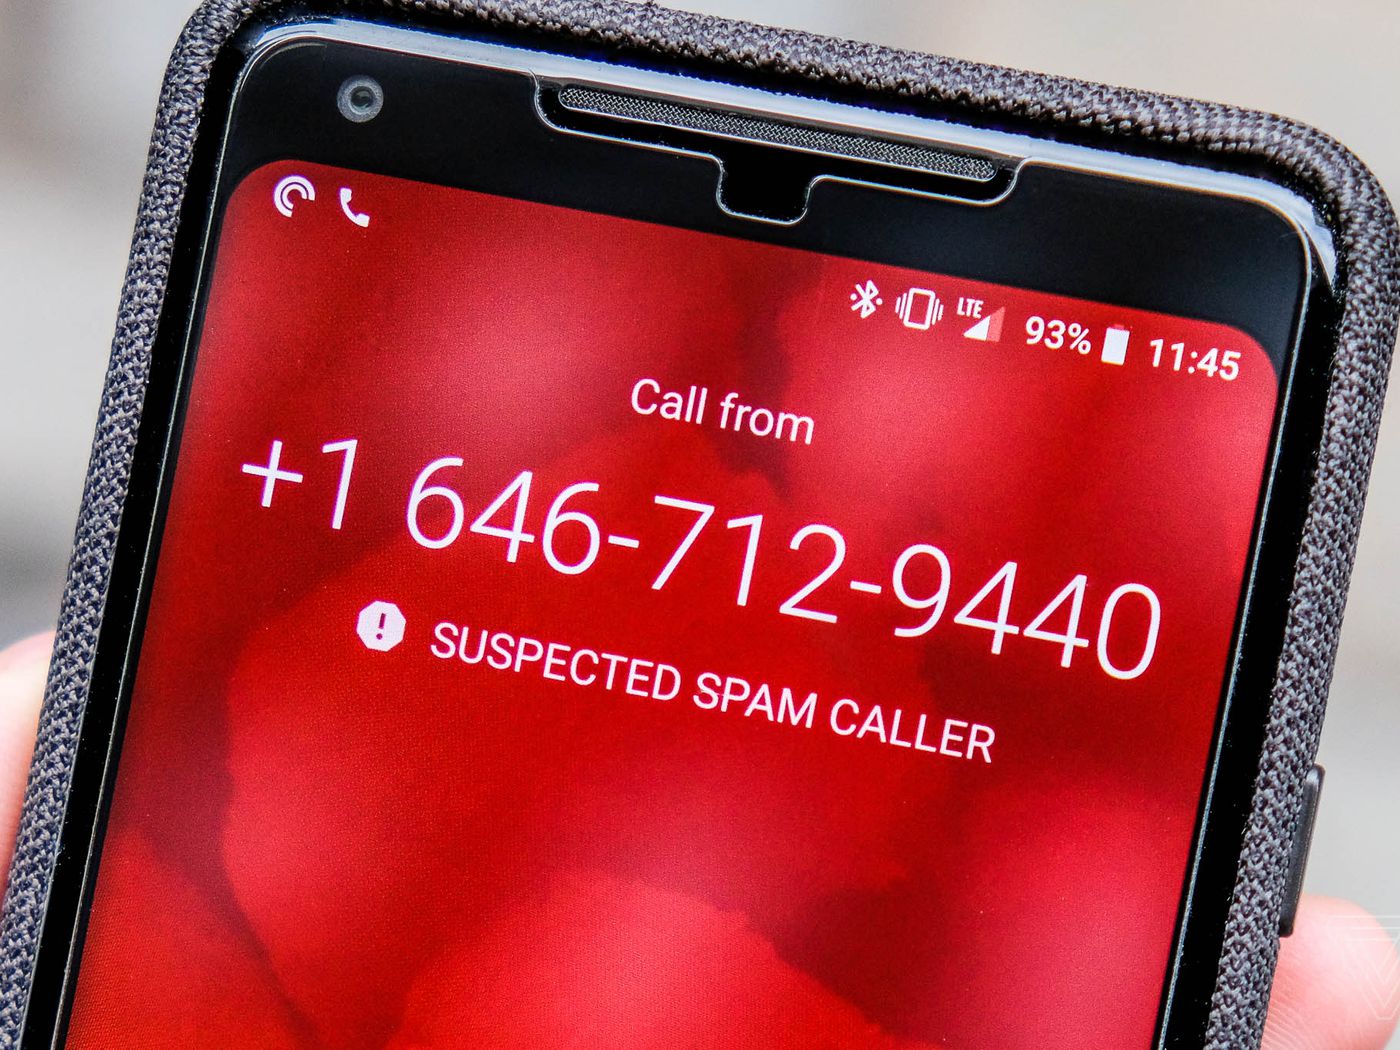 A report organized by the Truecaller app pointed out that Brazil is the nation with the highest number of spam phone calls. Another 19 countries were researched and analyzed based on the number of calls and unwanted messages detected by the app.